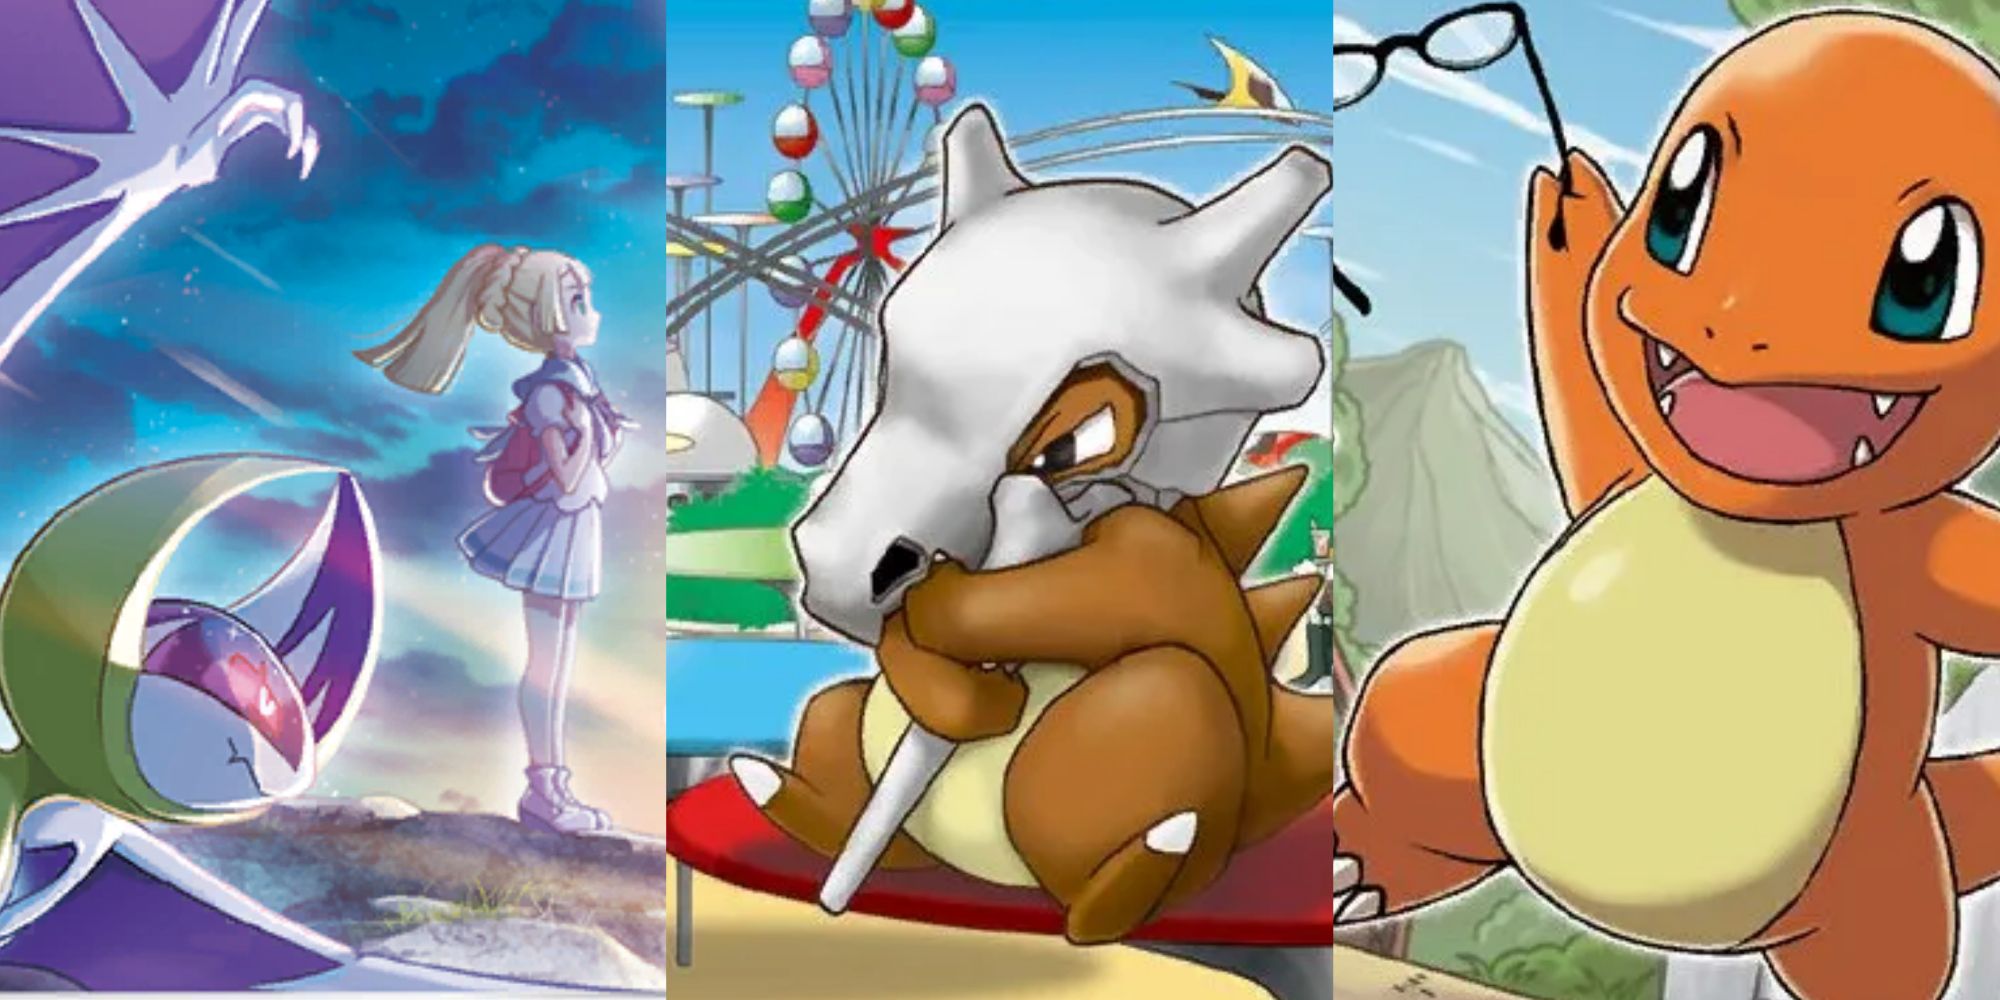 Split image screenshots of Lunala and Lillie in Lunala (Celebrations #015), Cubon clutching its bone in Cubone (BREAKthrough #77), and Charmander running with glasses in its hand in Charmander (Generations #RC3).